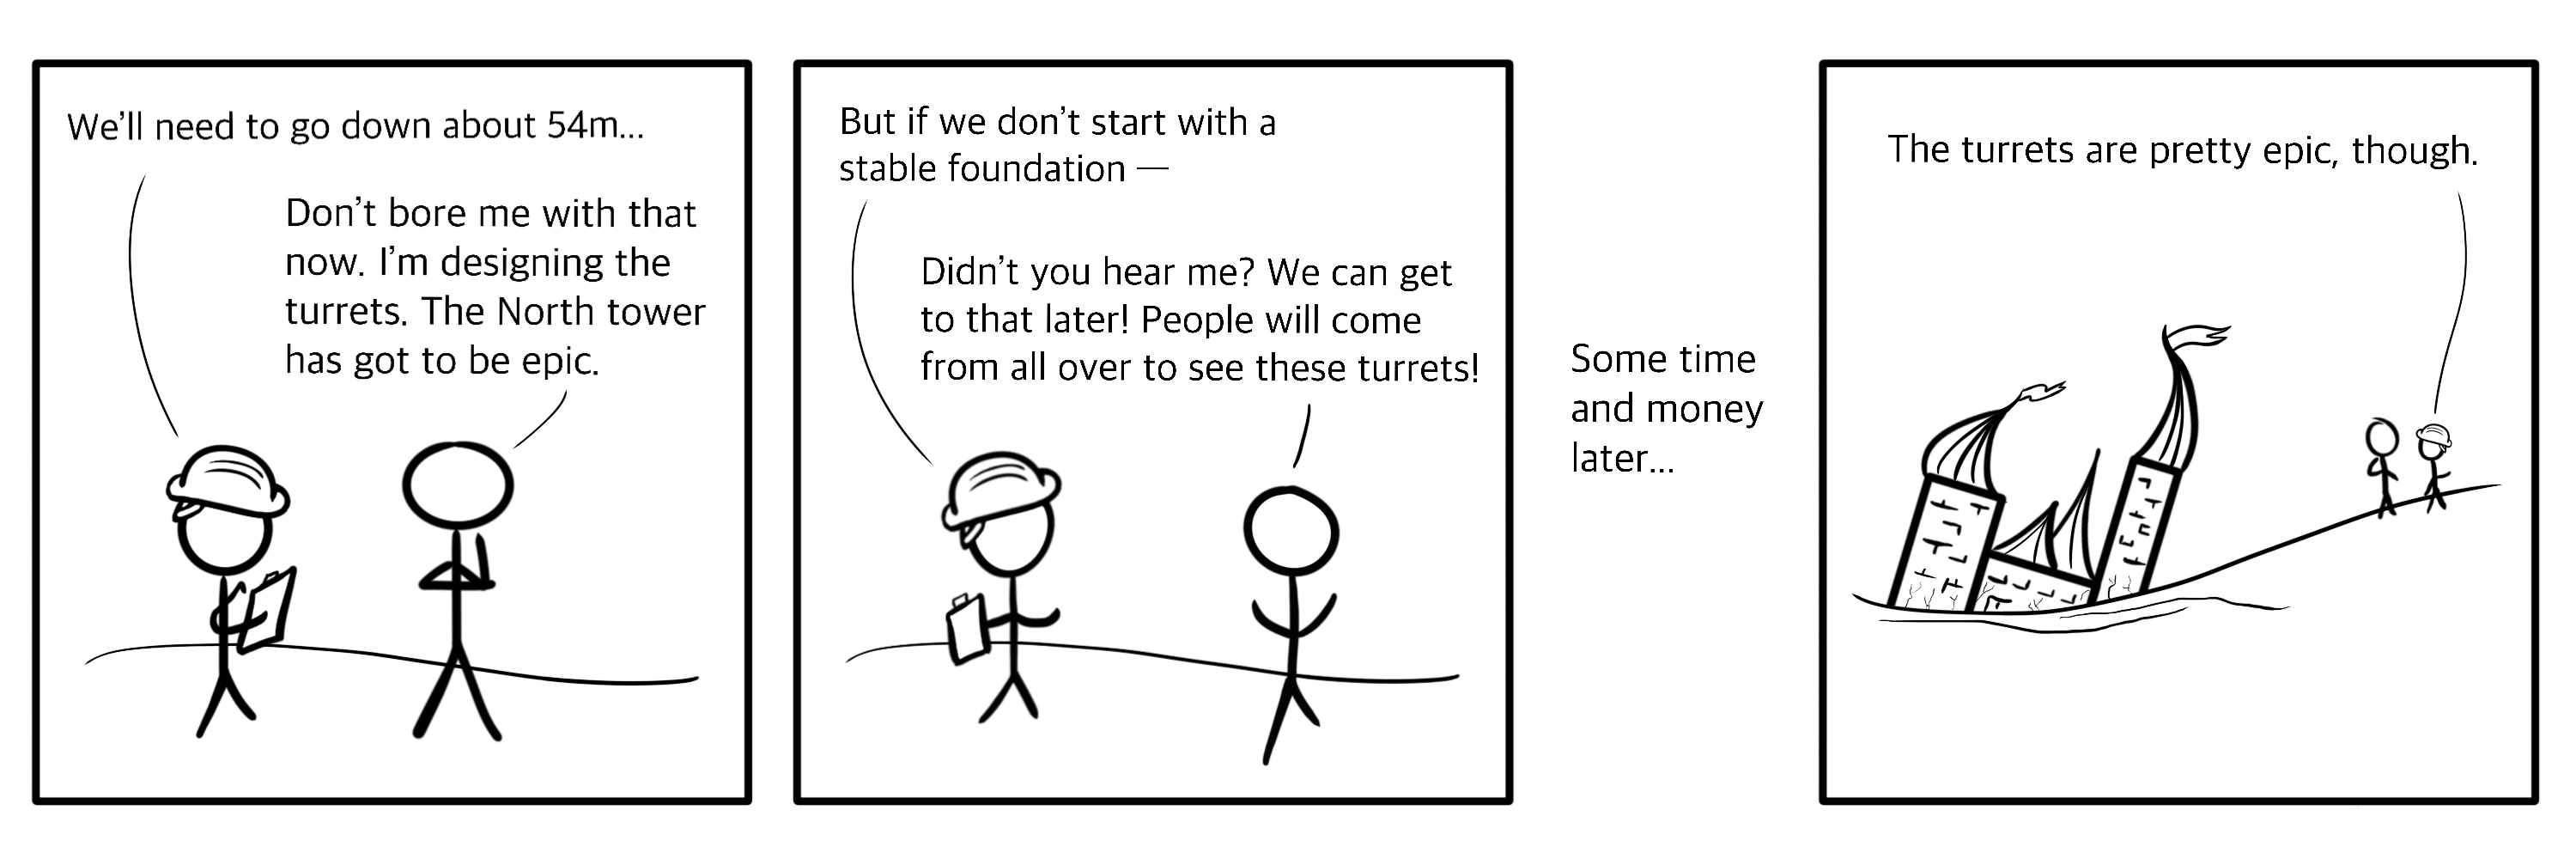 A comic I drew about building castles with poor foundations. It’s not that funny.